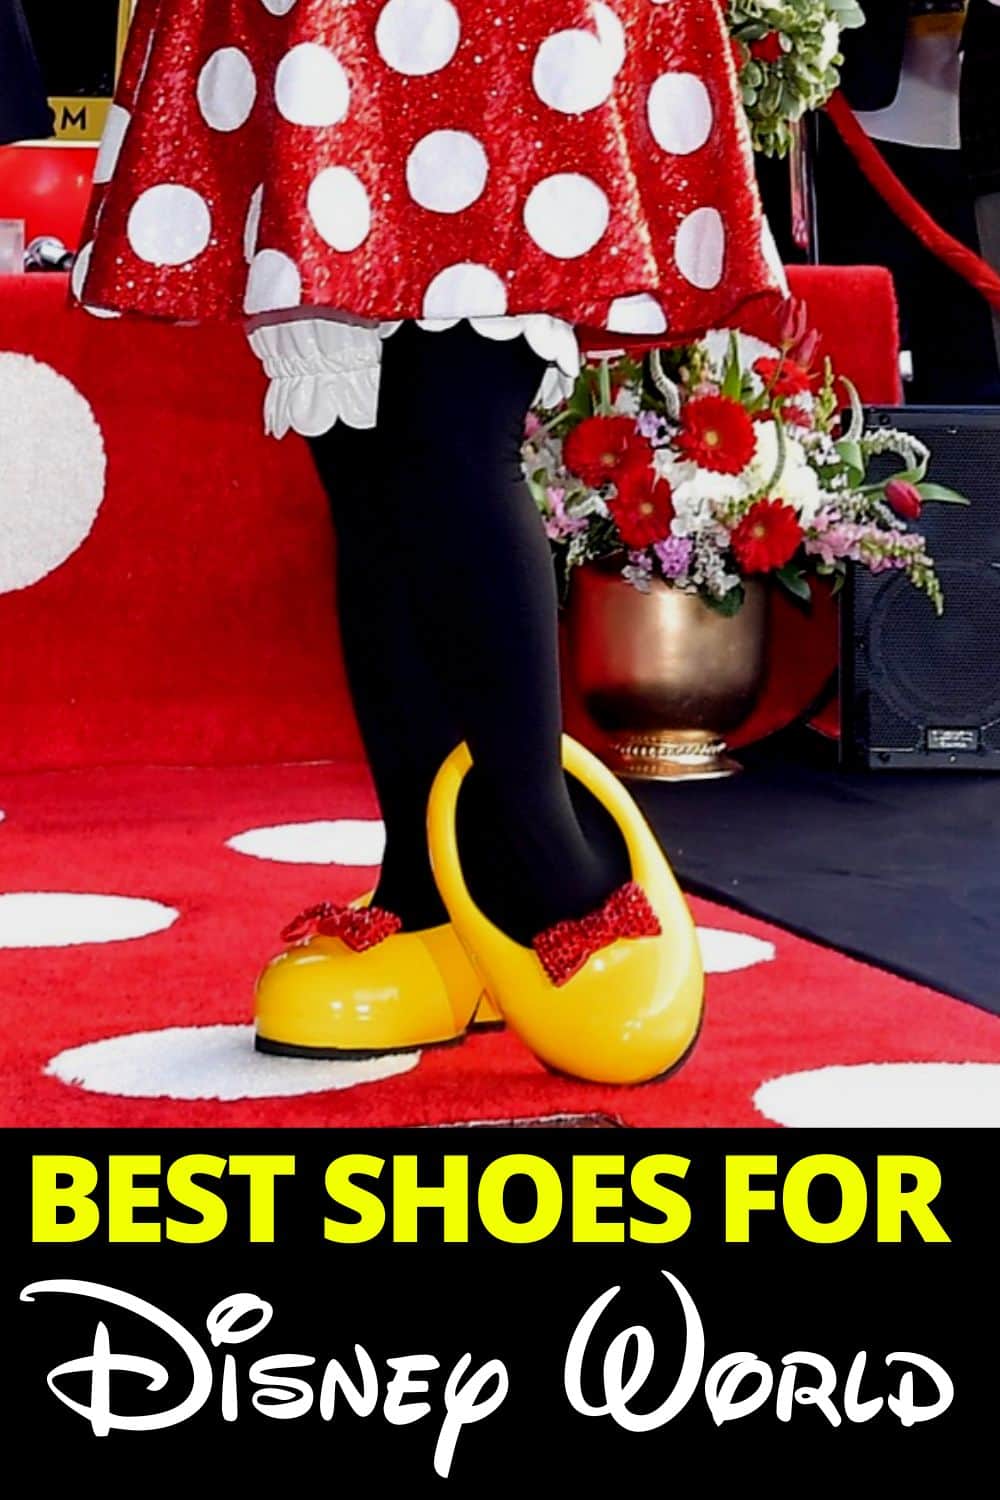 3 Best Shoes for Disney World in Florida